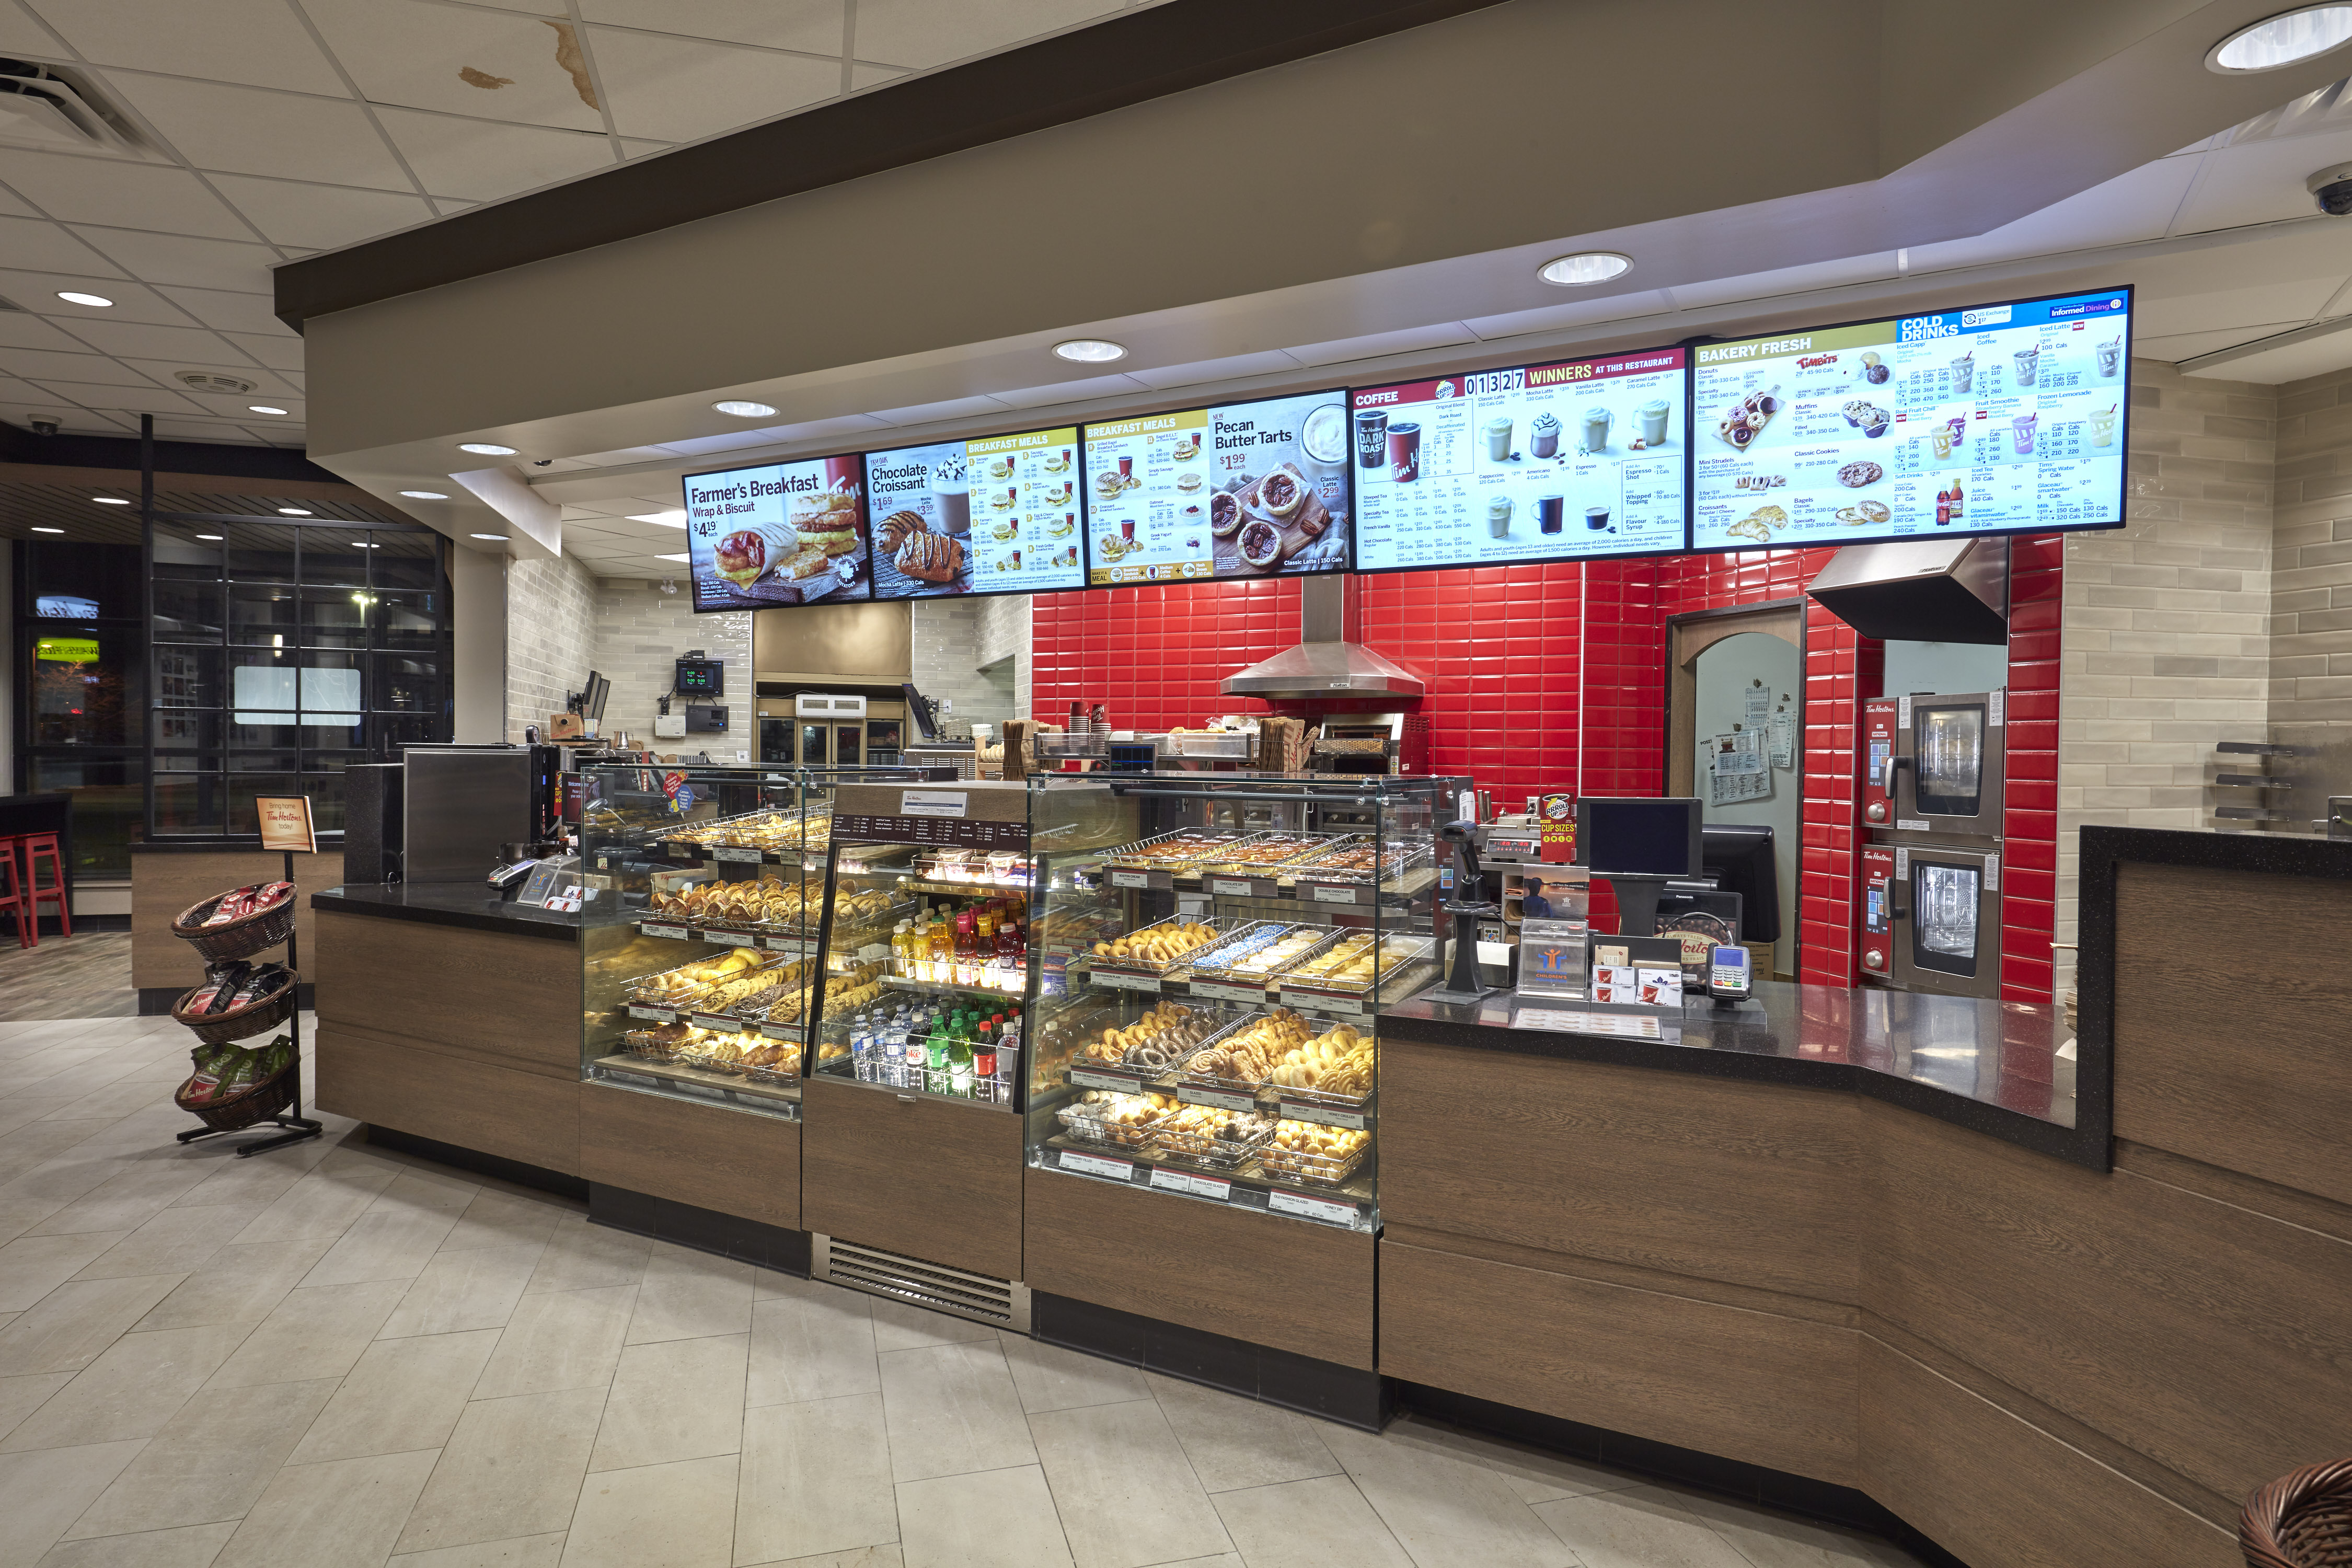 11 Very Canadian Facts About Tim Hortons